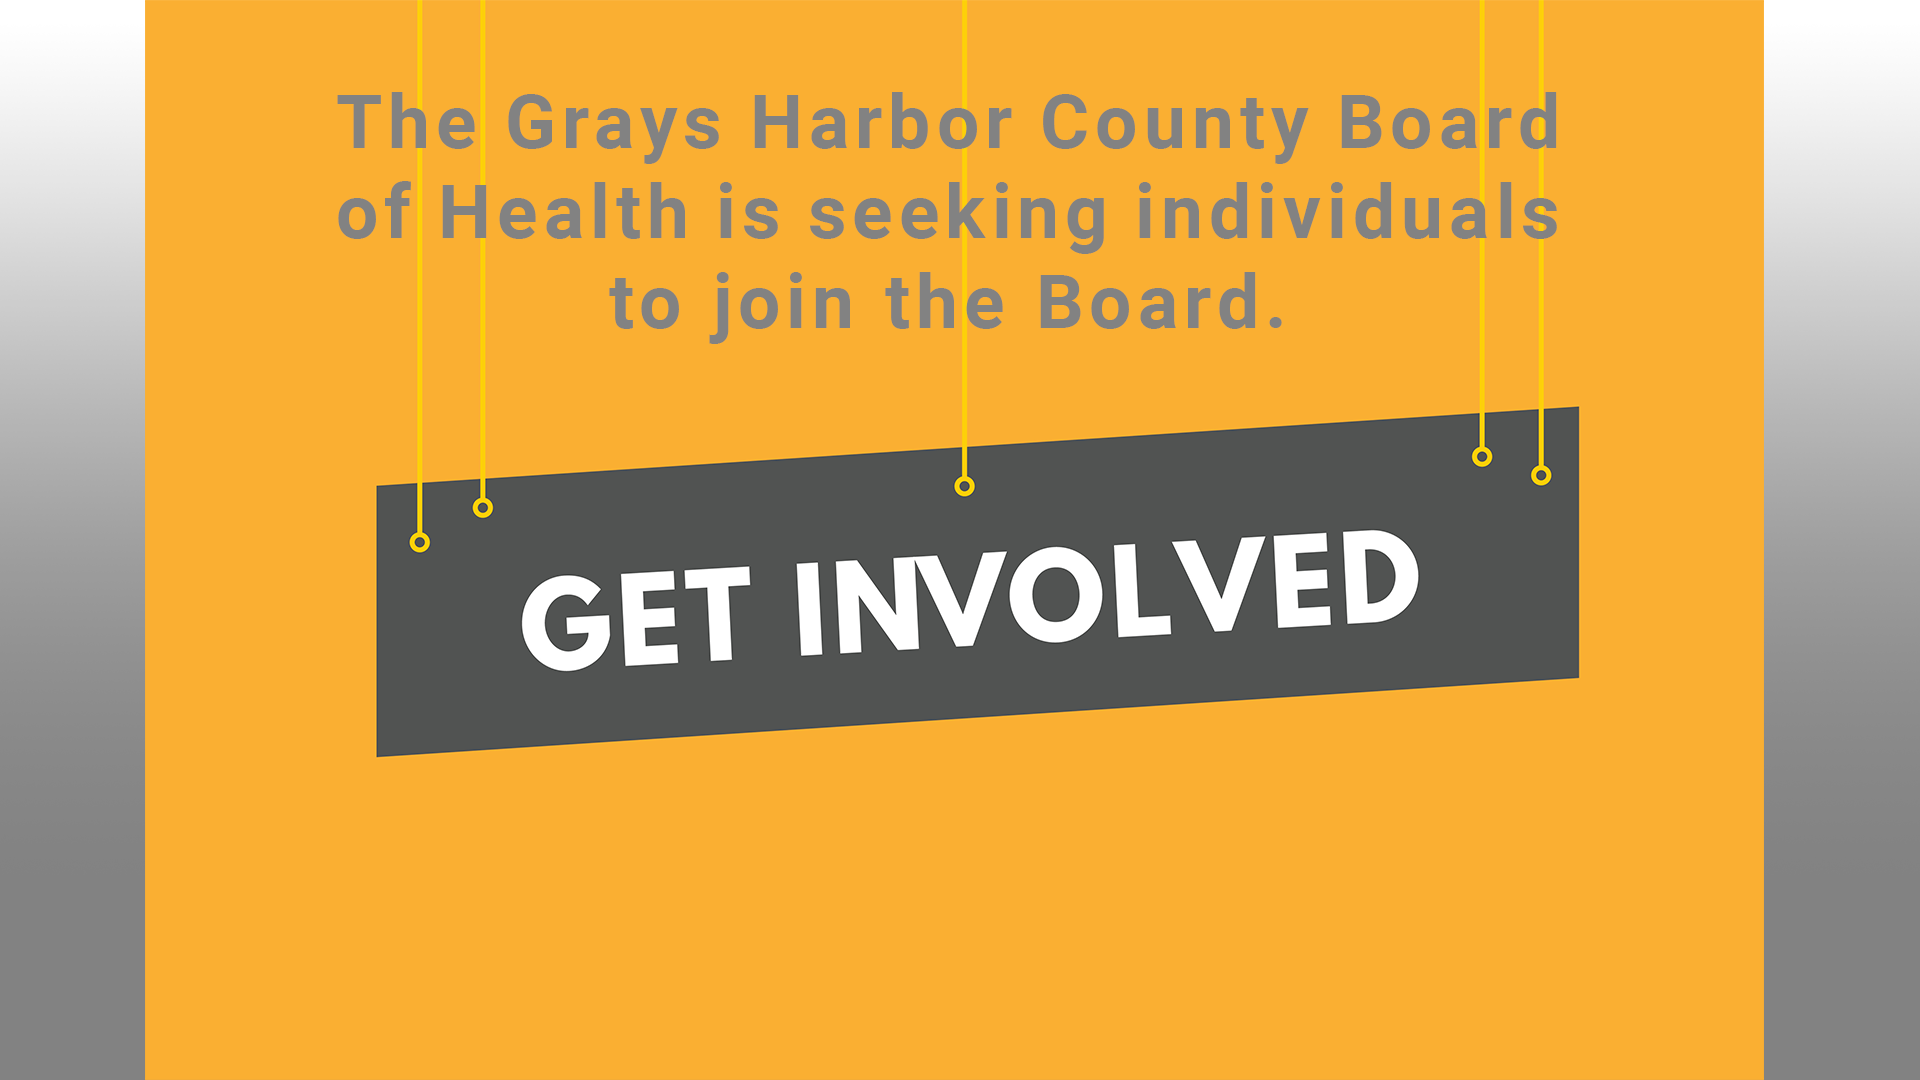 Learn more about joining the Board